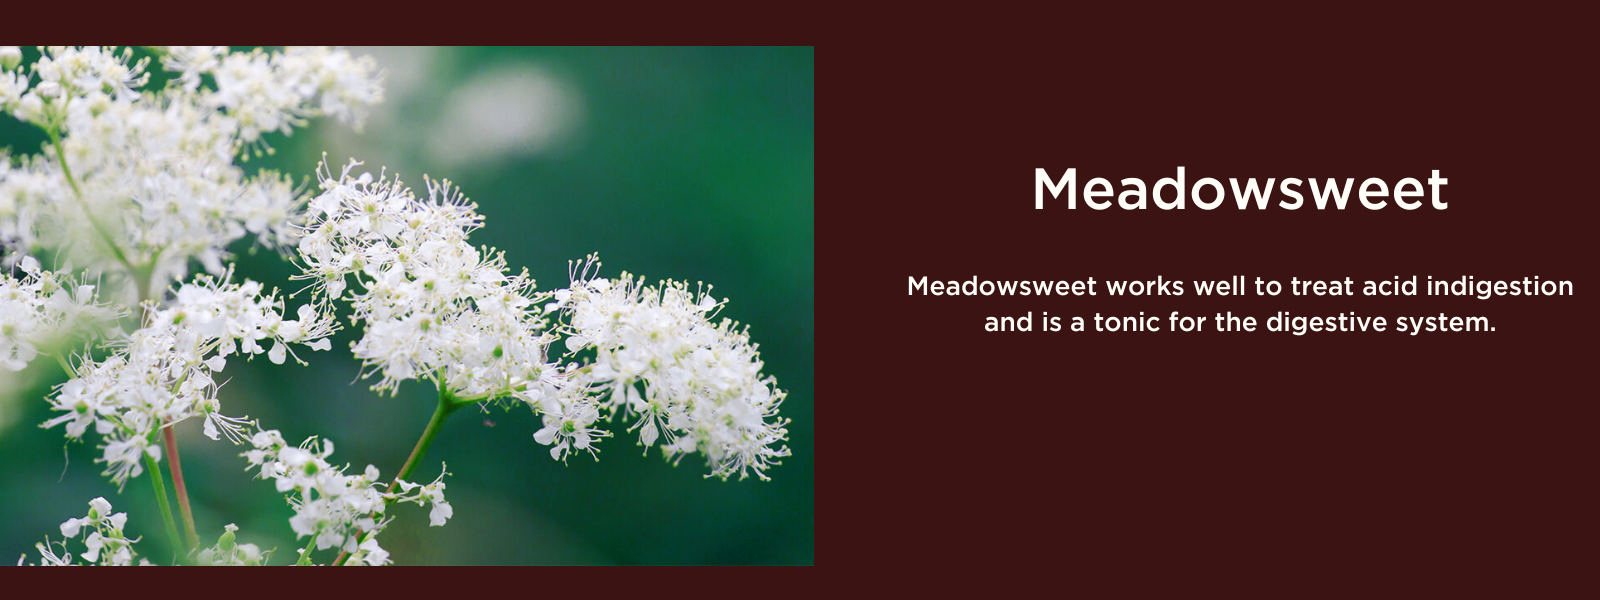 Meadowsweet - Health Benefits, Uses and Important Facts